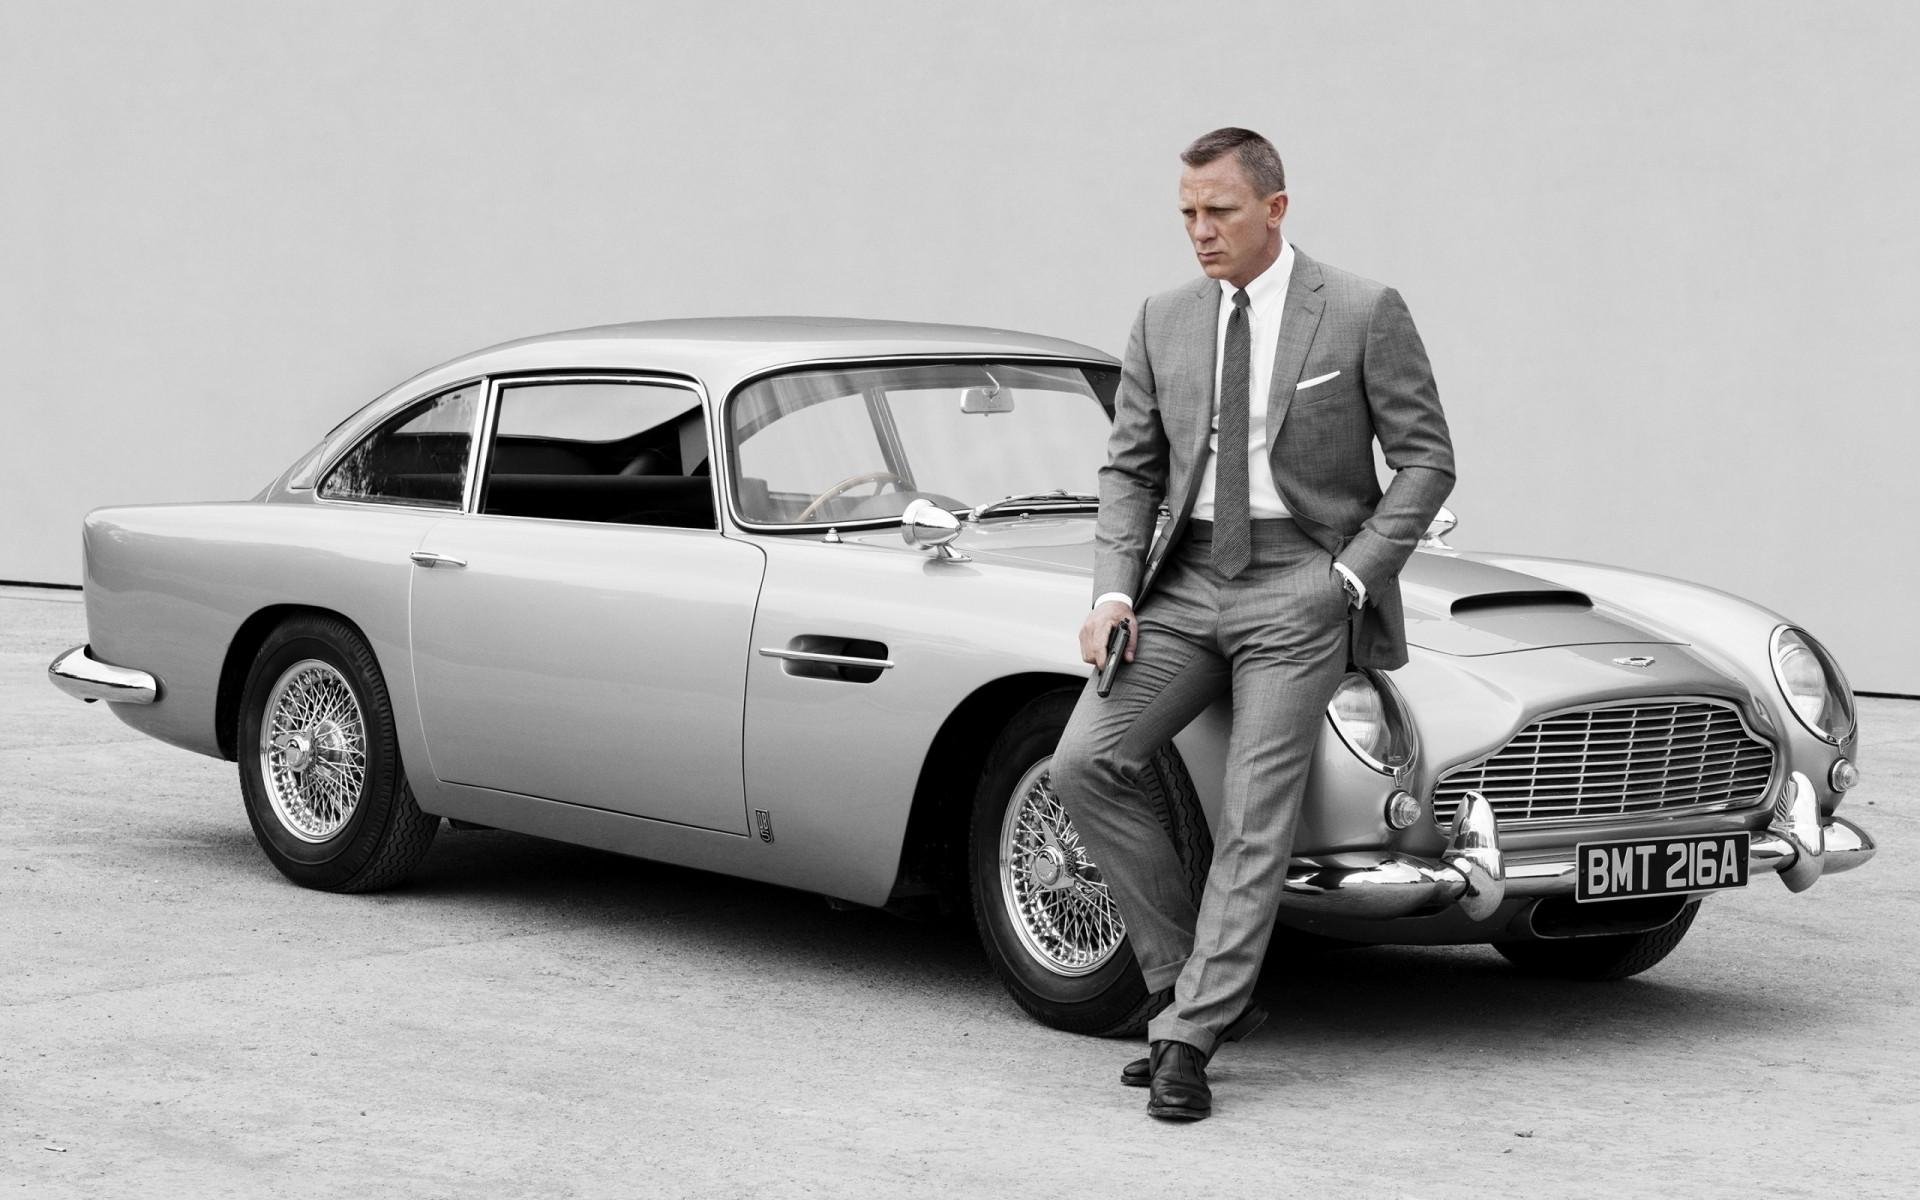 James Bond Skyfall 007. Android wallpaper for free